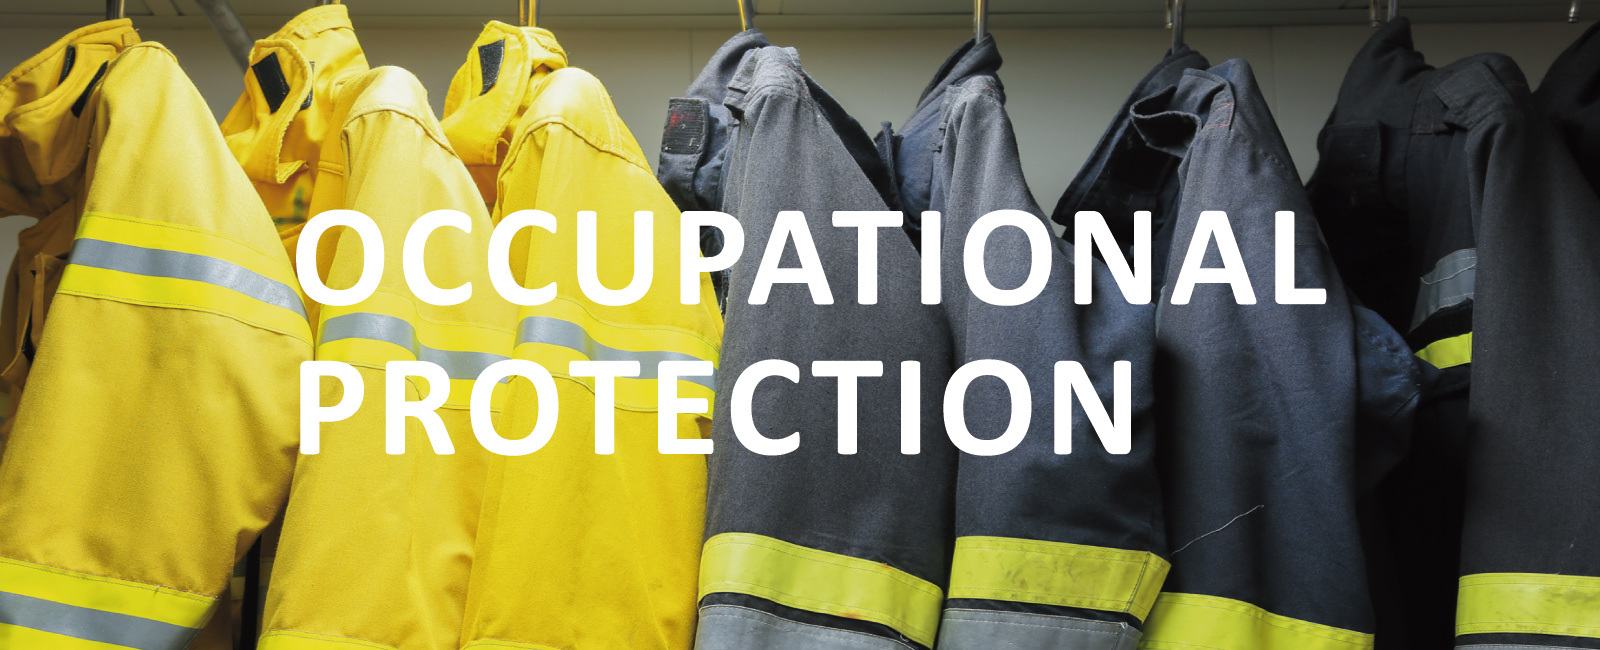 OCCUPATIONAL PROTECTION